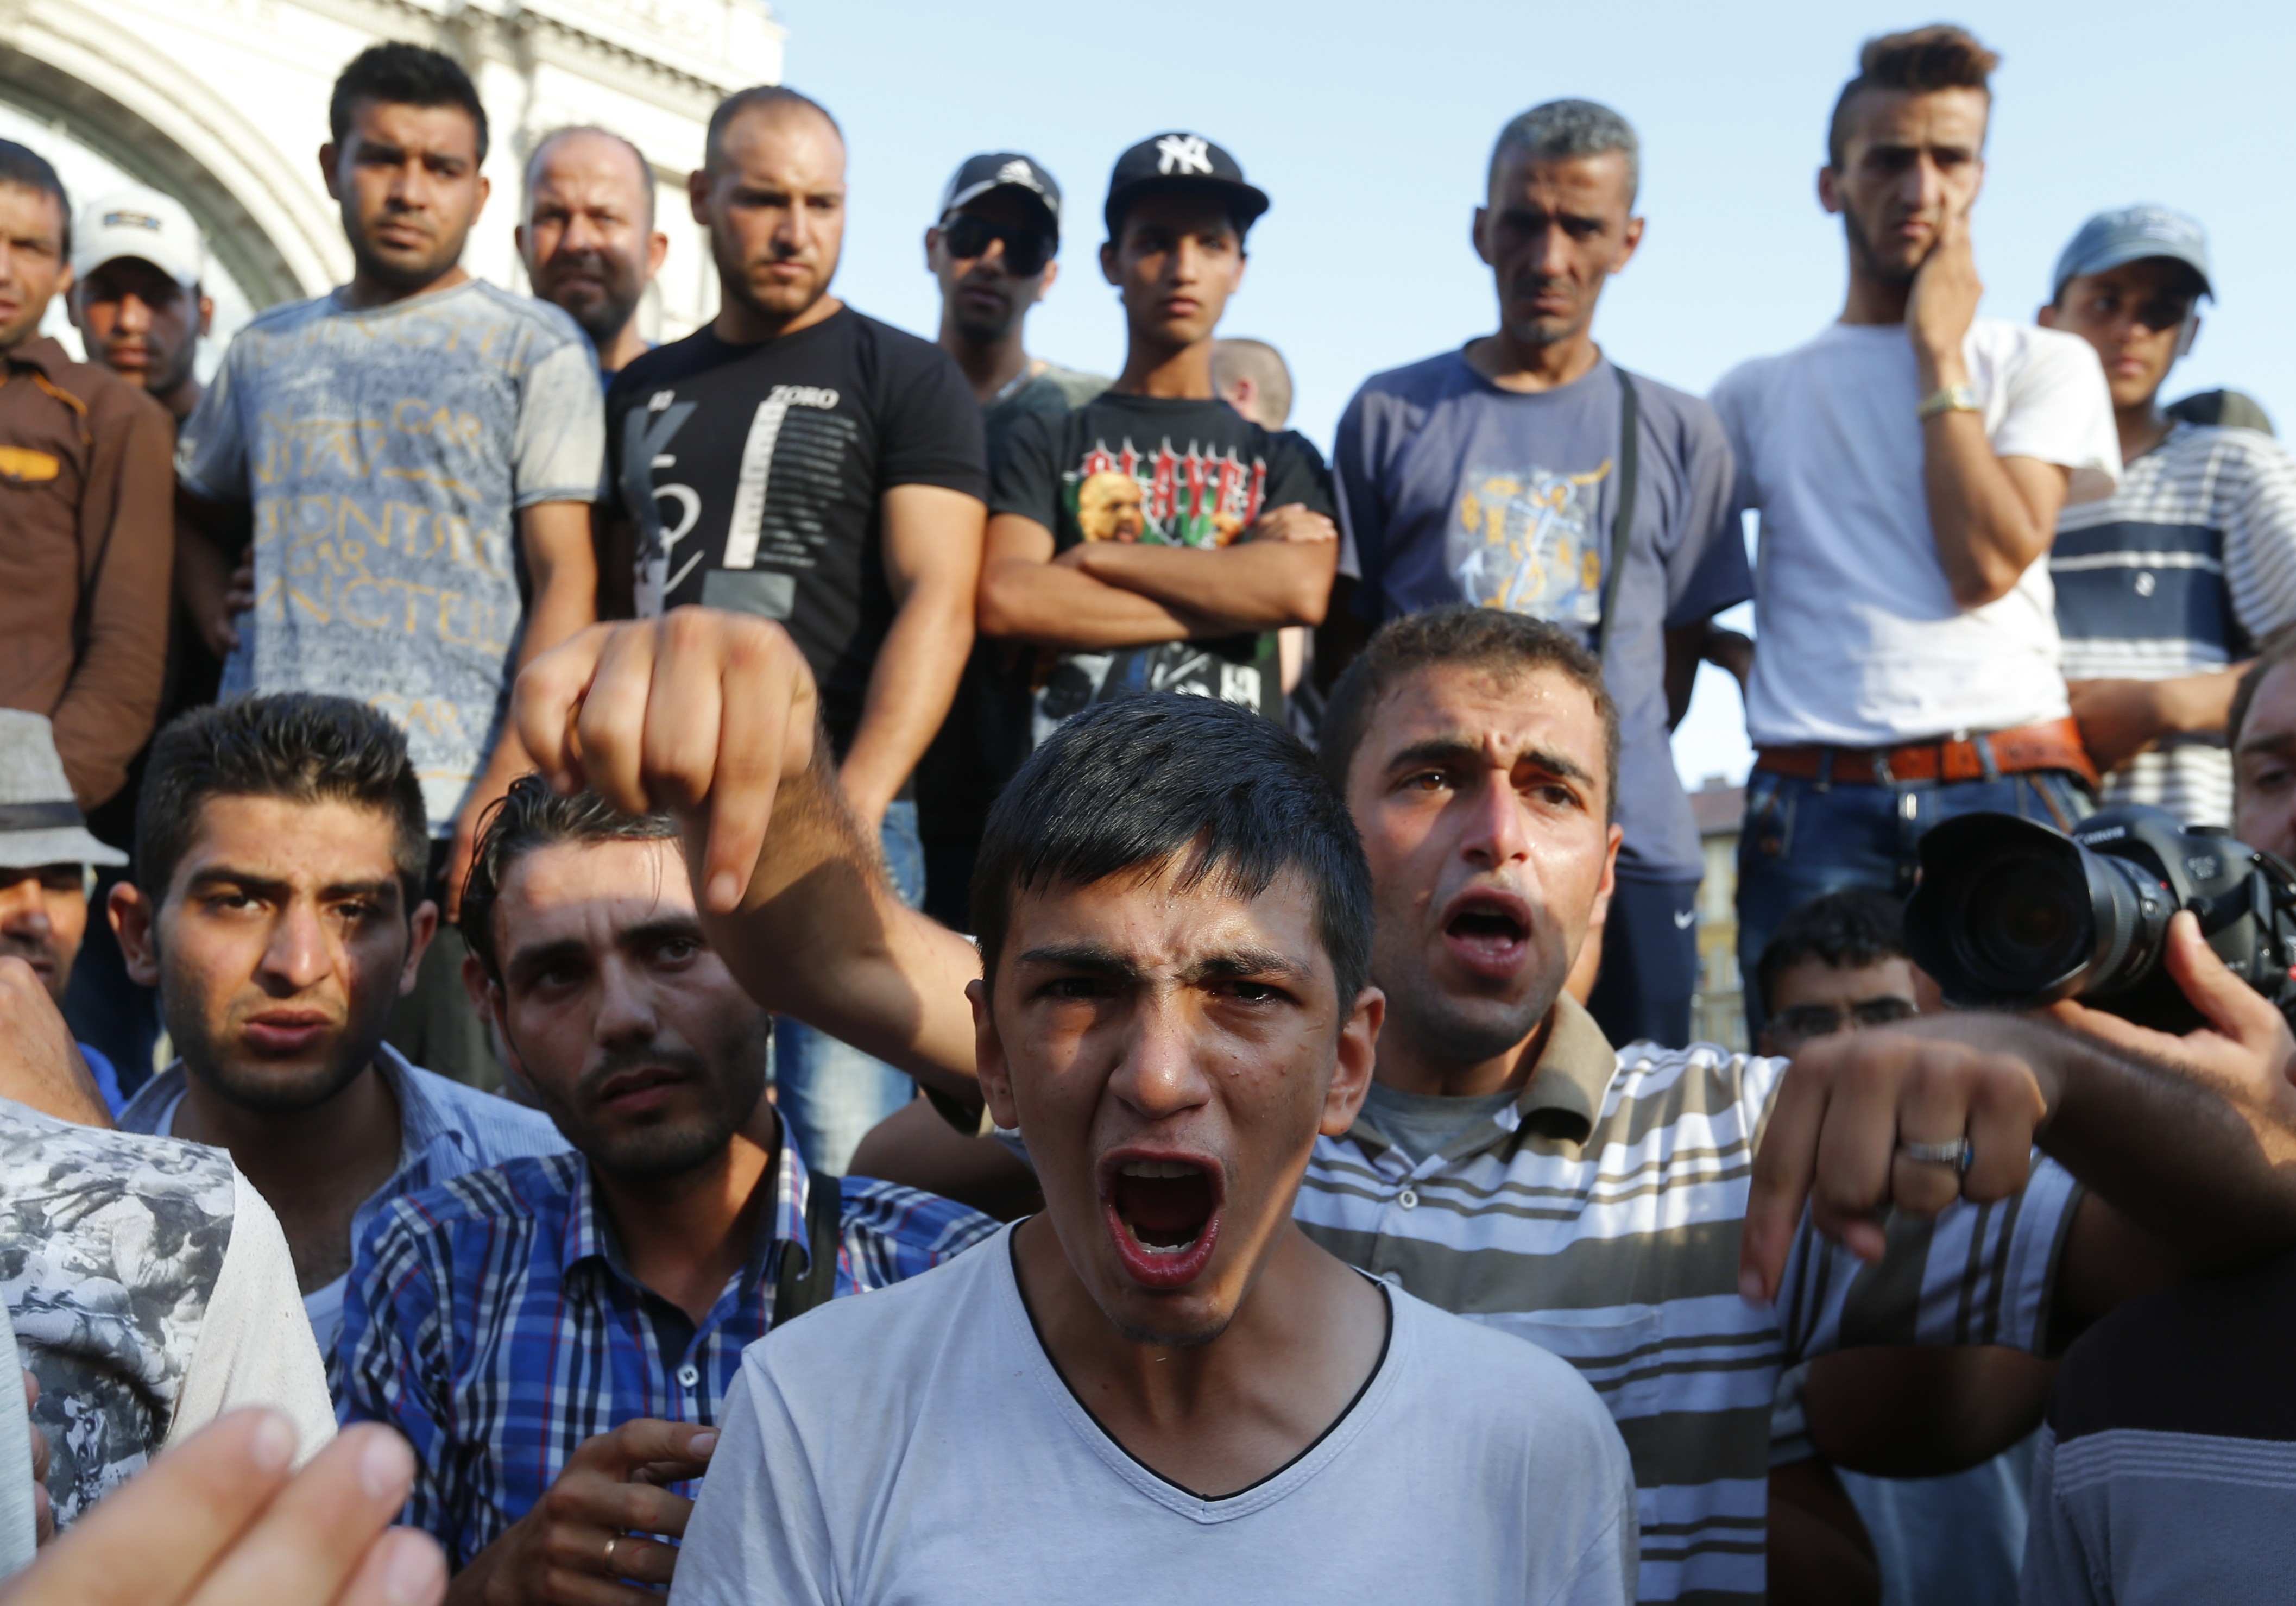 Amam, a17-year-old refugee from the Syrian town of Latakia shouts after his sister and mother were detained by Hungarian police outside the railways station in Budapest, Hungary September 2, 2015. Hundreds of migrants protest in front of Budapest's Keleti Railway Terminus for a second straight day on Wednesday, shouting "Freedom, freedom!" and demanding to be let onto trains bound for Germany from a station that has been closed to them by Hungarian riot police officers.  REUTERS/Laszlo Balogh         (Newscom TagID: rtrlseven280456.jpg) [Photo via Newscom]